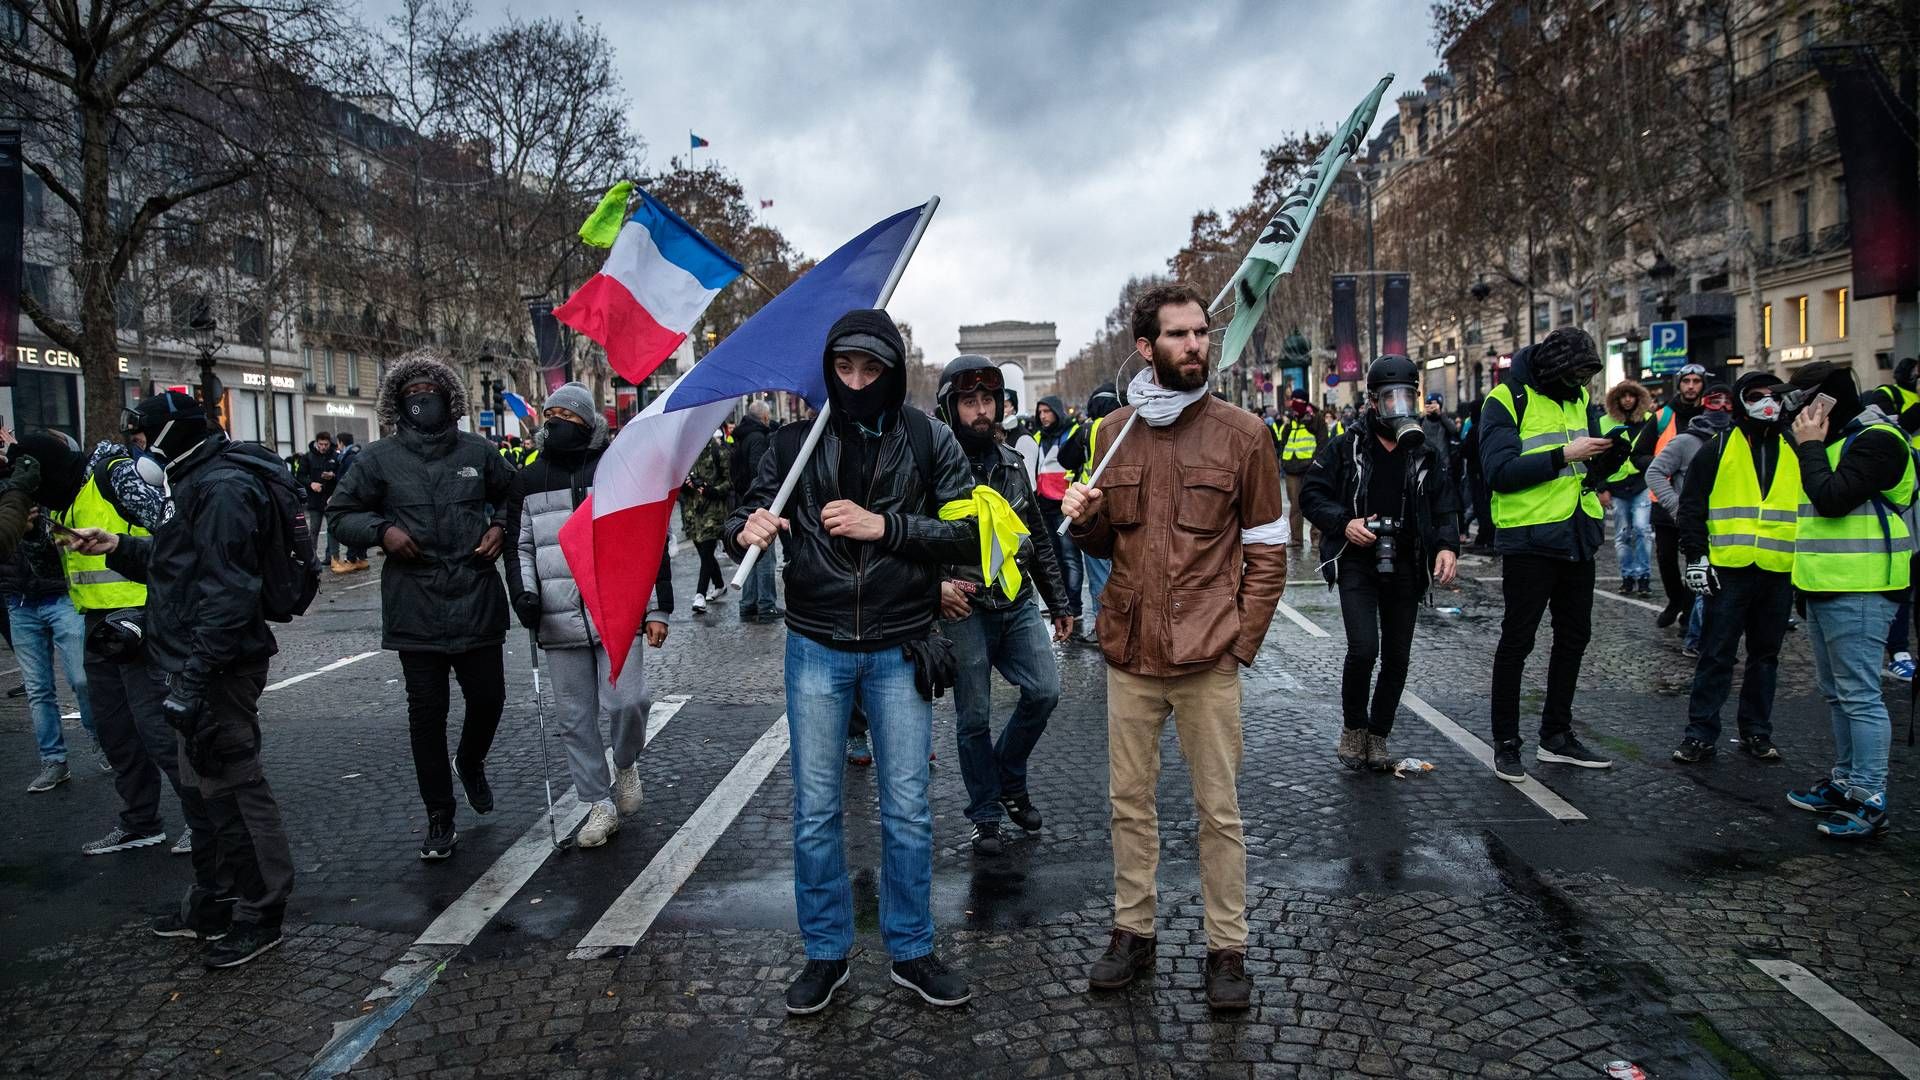 Rising fuel prices in France in 2018 led to demonstrations and the "Yellow Vests" movement. | Photo: Jacob Ehrbahn